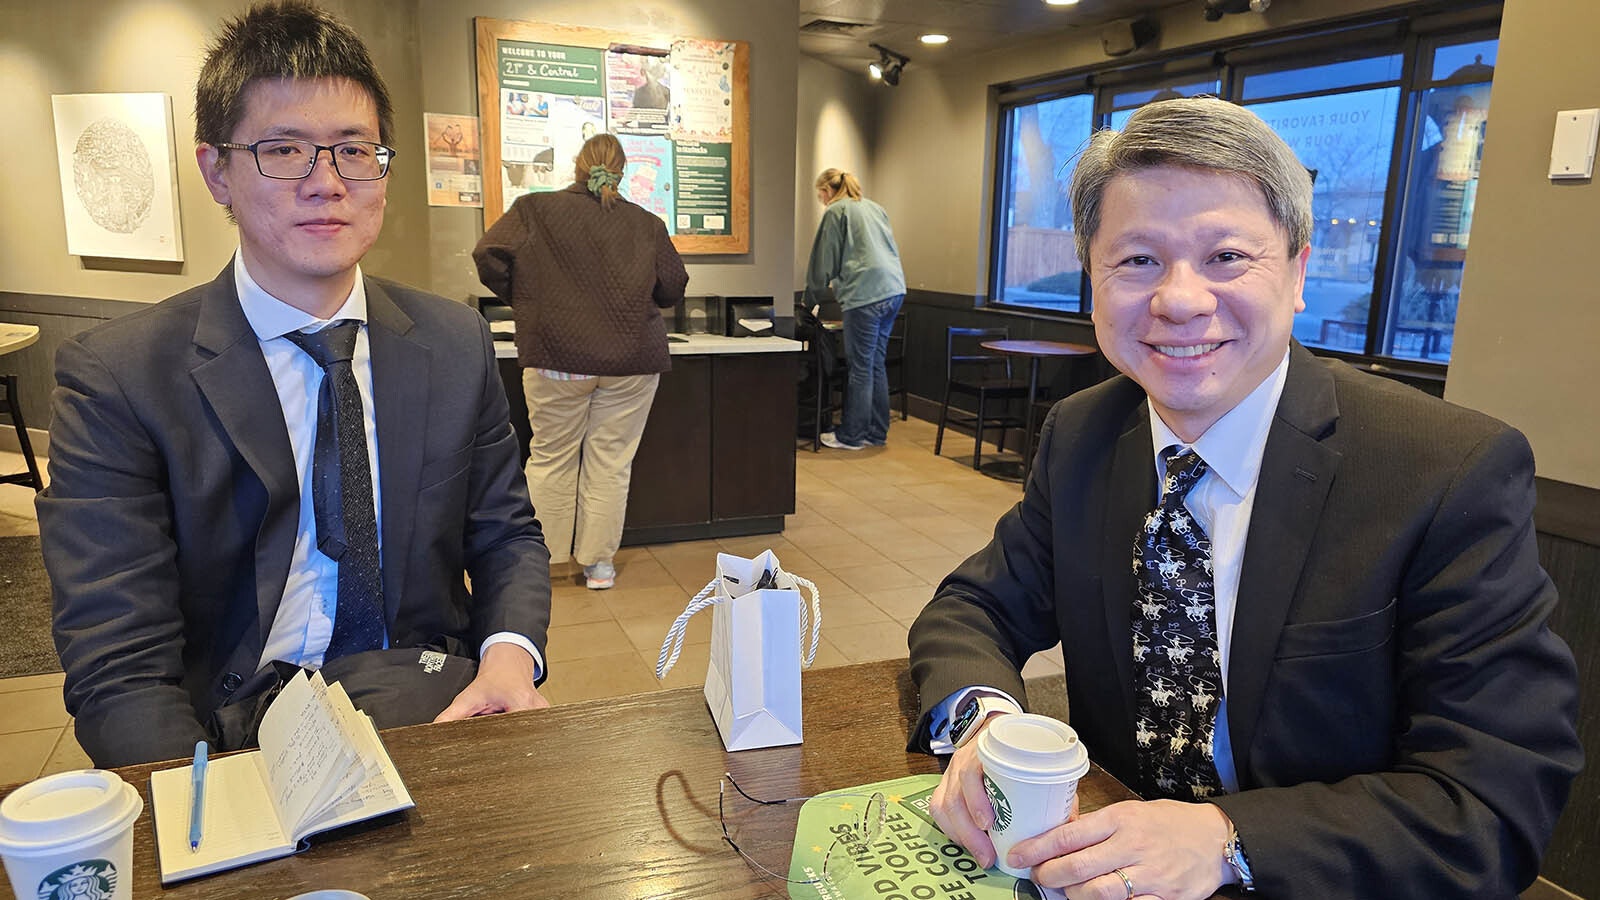 Tony Nien Tzu Hu, left, and Director General Daniel Chen, both with the Taipei Economic and Cultural Office in Seattle, were in Wyoming recently as part of their mission to strengthen ties between the Cowboy State and Taiwan.